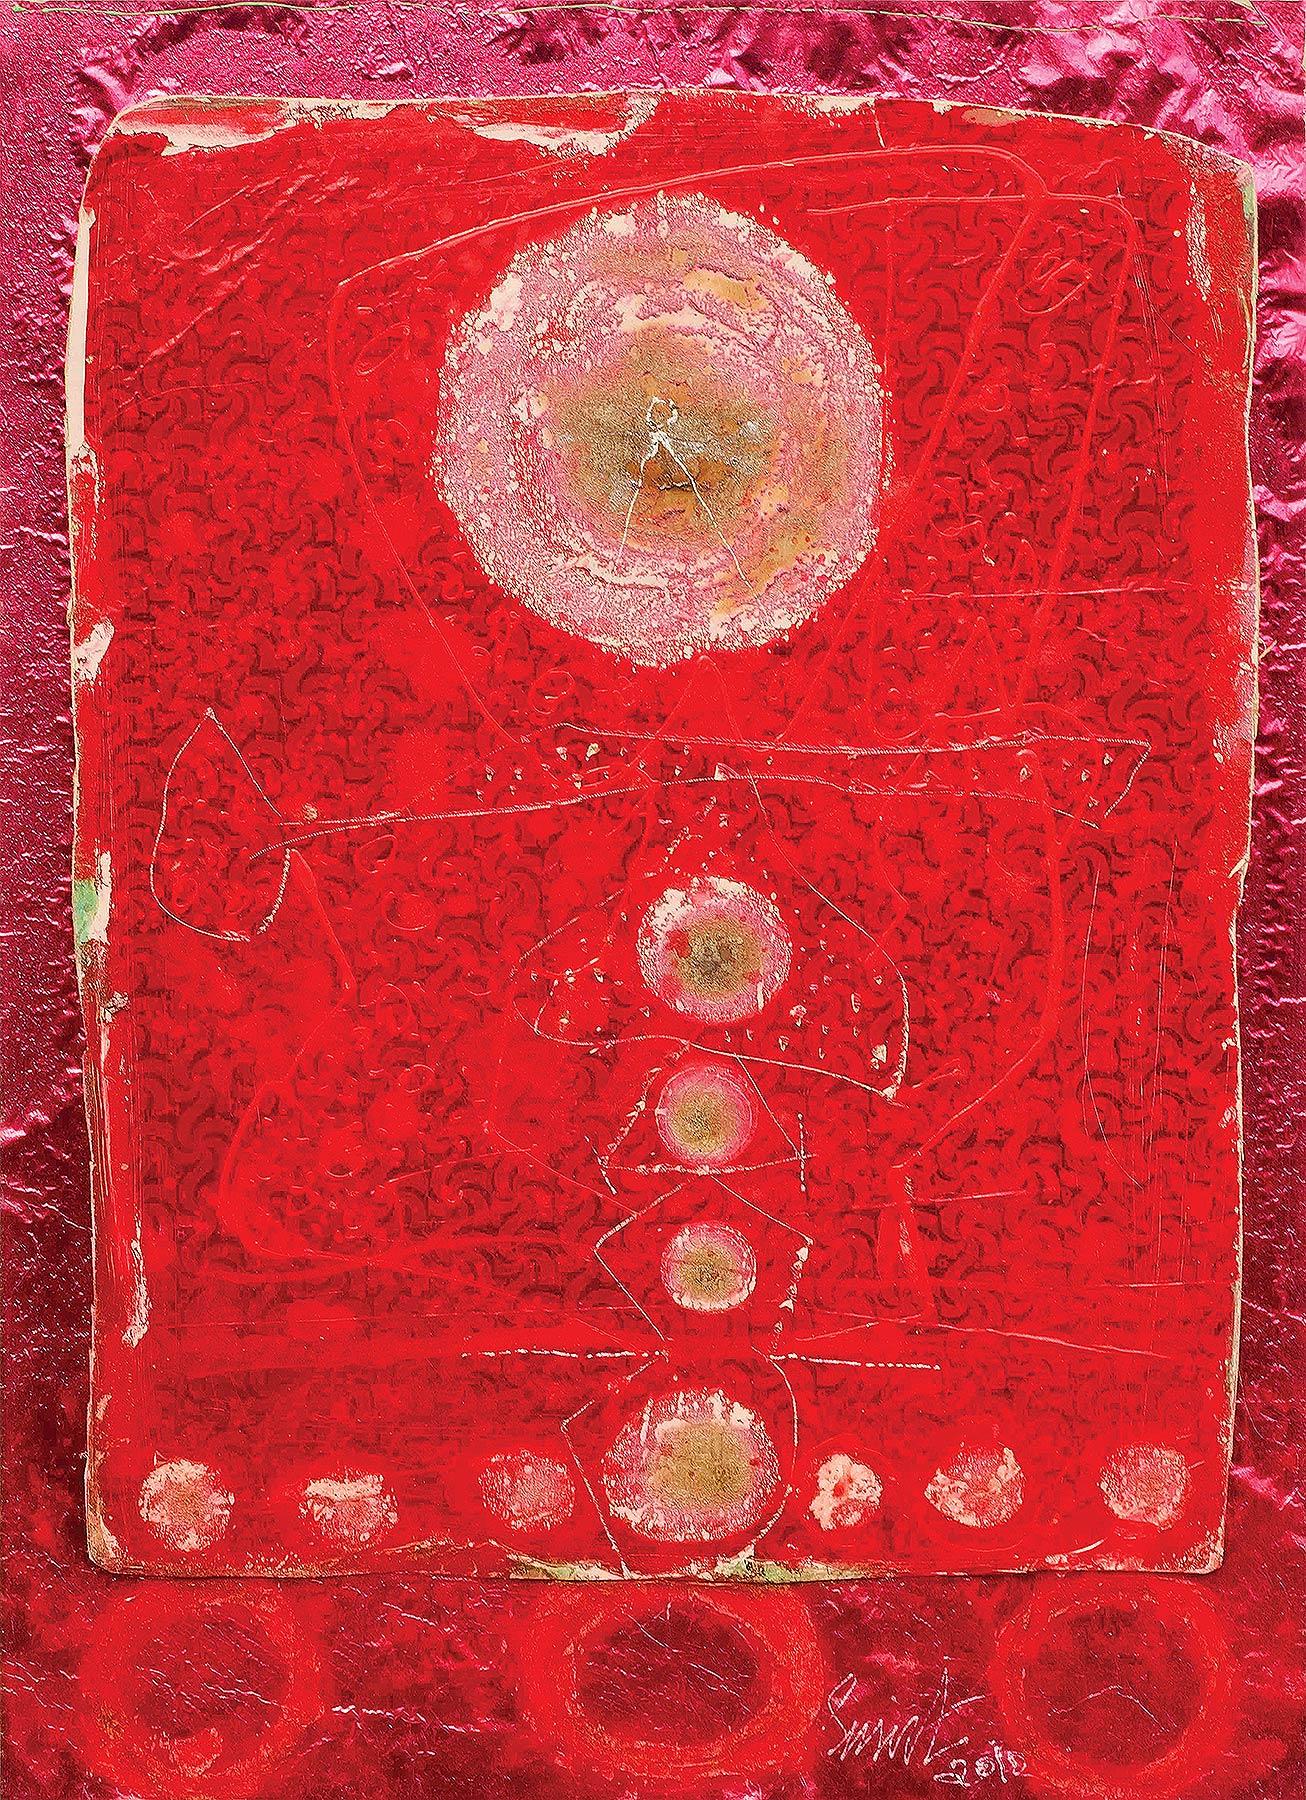 Collage Series VI, Mixed Media, Paper, Foil, Acrylic, Red, Pink "In Stock"